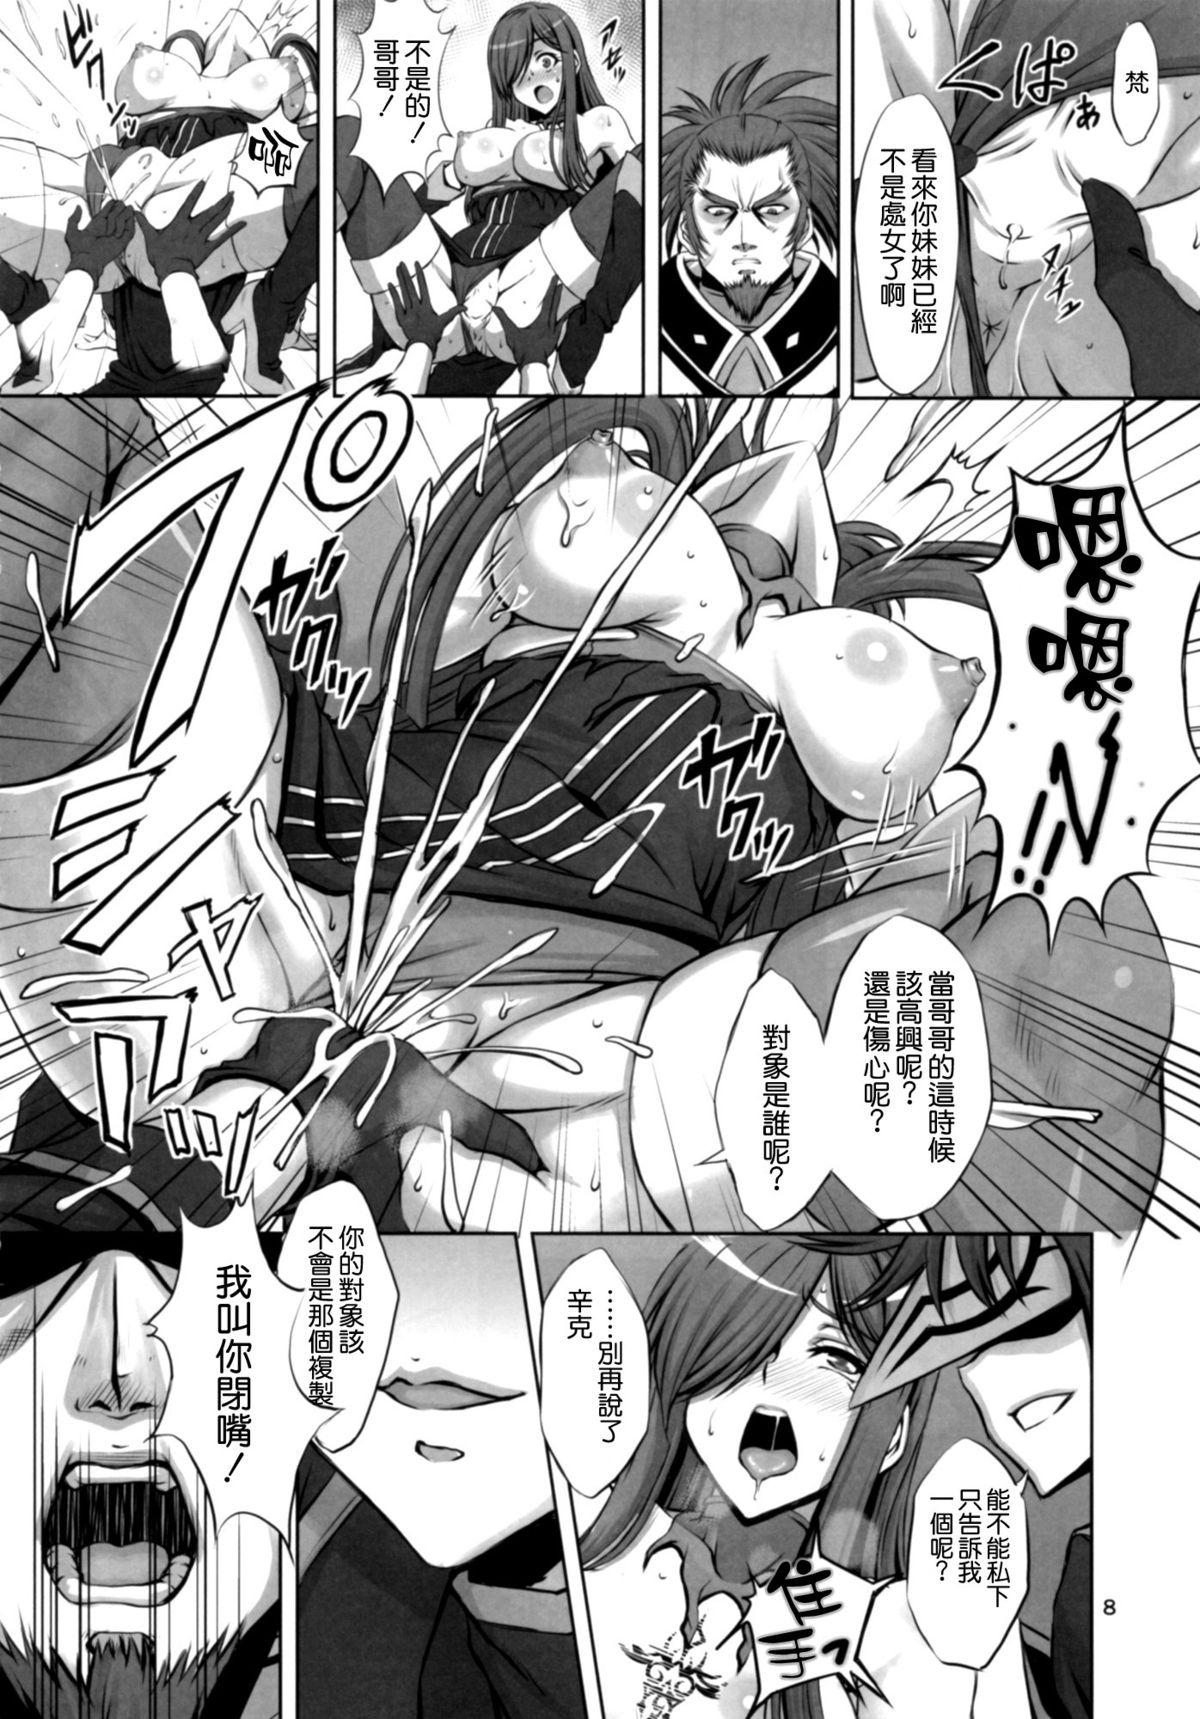 Double Blowjob Shin ◎ - Tales of the abyss Petite - Page 8